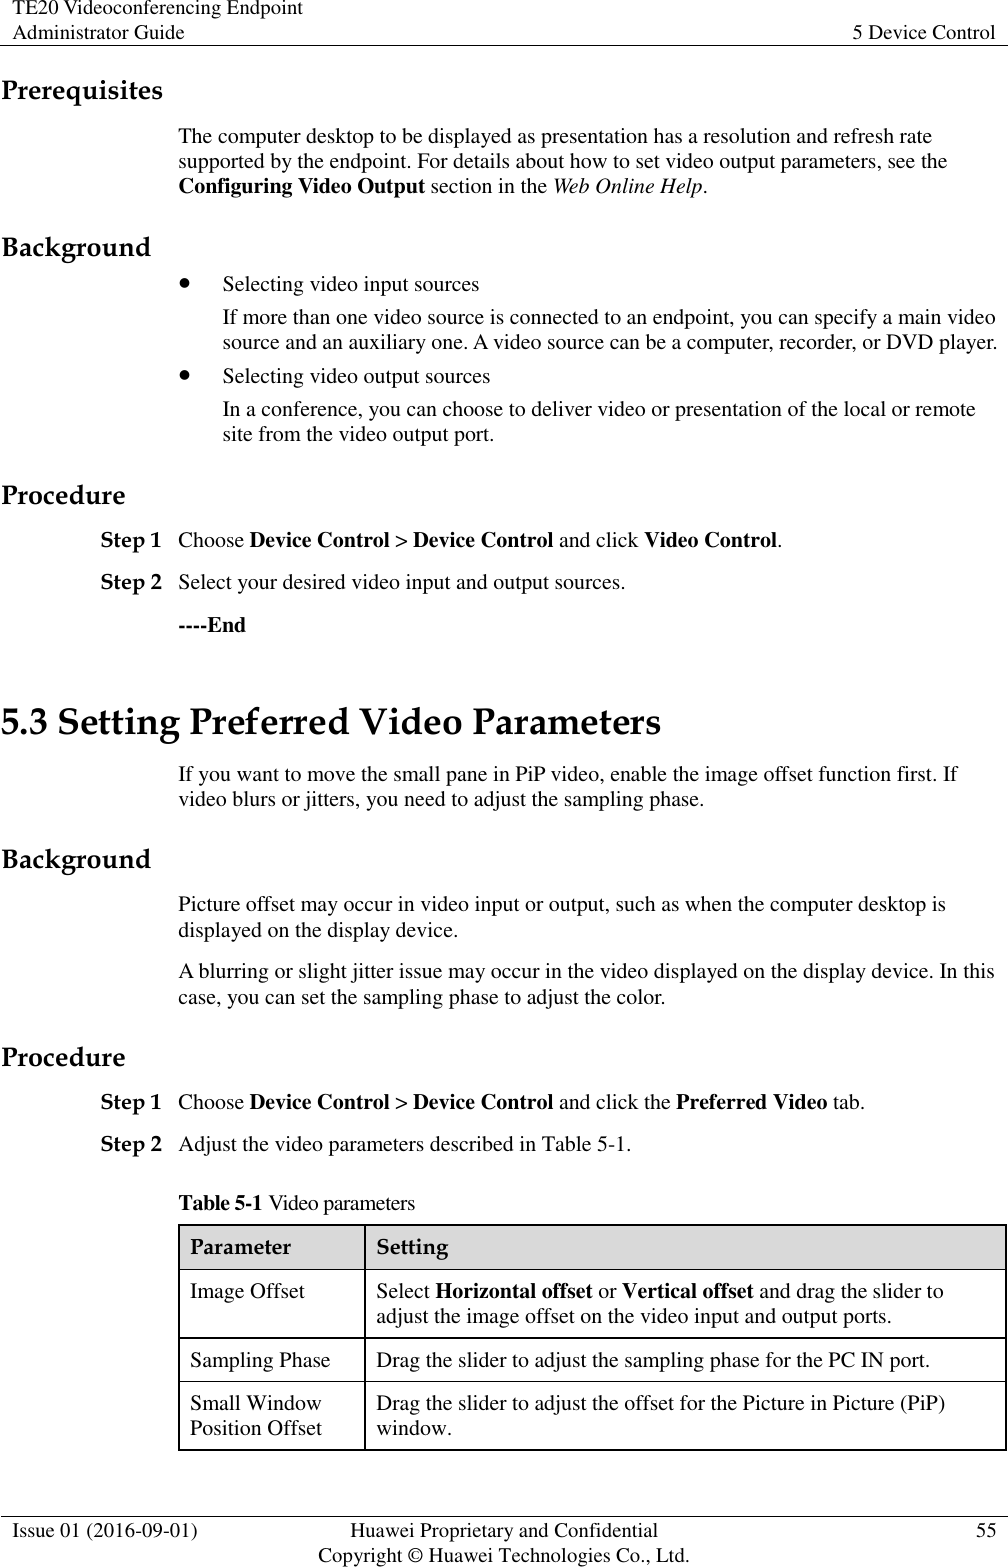 TE20 Videoconferencing Endpoint Administrator Guide 5 Device Control  Issue 01 (2016-09-01) Huawei Proprietary and Confidential                                     Copyright © Huawei Technologies Co., Ltd. 55  Prerequisites The computer desktop to be displayed as presentation has a resolution and refresh rate supported by the endpoint. For details about how to set video output parameters, see the Configuring Video Output section in the Web Online Help. Background  Selecting video input sources If more than one video source is connected to an endpoint, you can specify a main video source and an auxiliary one. A video source can be a computer, recorder, or DVD player.  Selecting video output sources In a conference, you can choose to deliver video or presentation of the local or remote site from the video output port. Procedure Step 1 Choose Device Control &gt; Device Control and click Video Control. Step 2 Select your desired video input and output sources. ----End 5.3 Setting Preferred Video Parameters If you want to move the small pane in PiP video, enable the image offset function first. If video blurs or jitters, you need to adjust the sampling phase. Background Picture offset may occur in video input or output, such as when the computer desktop is displayed on the display device.   A blurring or slight jitter issue may occur in the video displayed on the display device. In this case, you can set the sampling phase to adjust the color. Procedure Step 1 Choose Device Control &gt; Device Control and click the Preferred Video tab.   Step 2 Adjust the video parameters described in Table 5-1. Table 5-1 Video parameters Parameter Setting Image Offset Select Horizontal offset or Vertical offset and drag the slider to adjust the image offset on the video input and output ports. Sampling Phase Drag the slider to adjust the sampling phase for the PC IN port. Small Window Position Offset Drag the slider to adjust the offset for the Picture in Picture (PiP) window. 